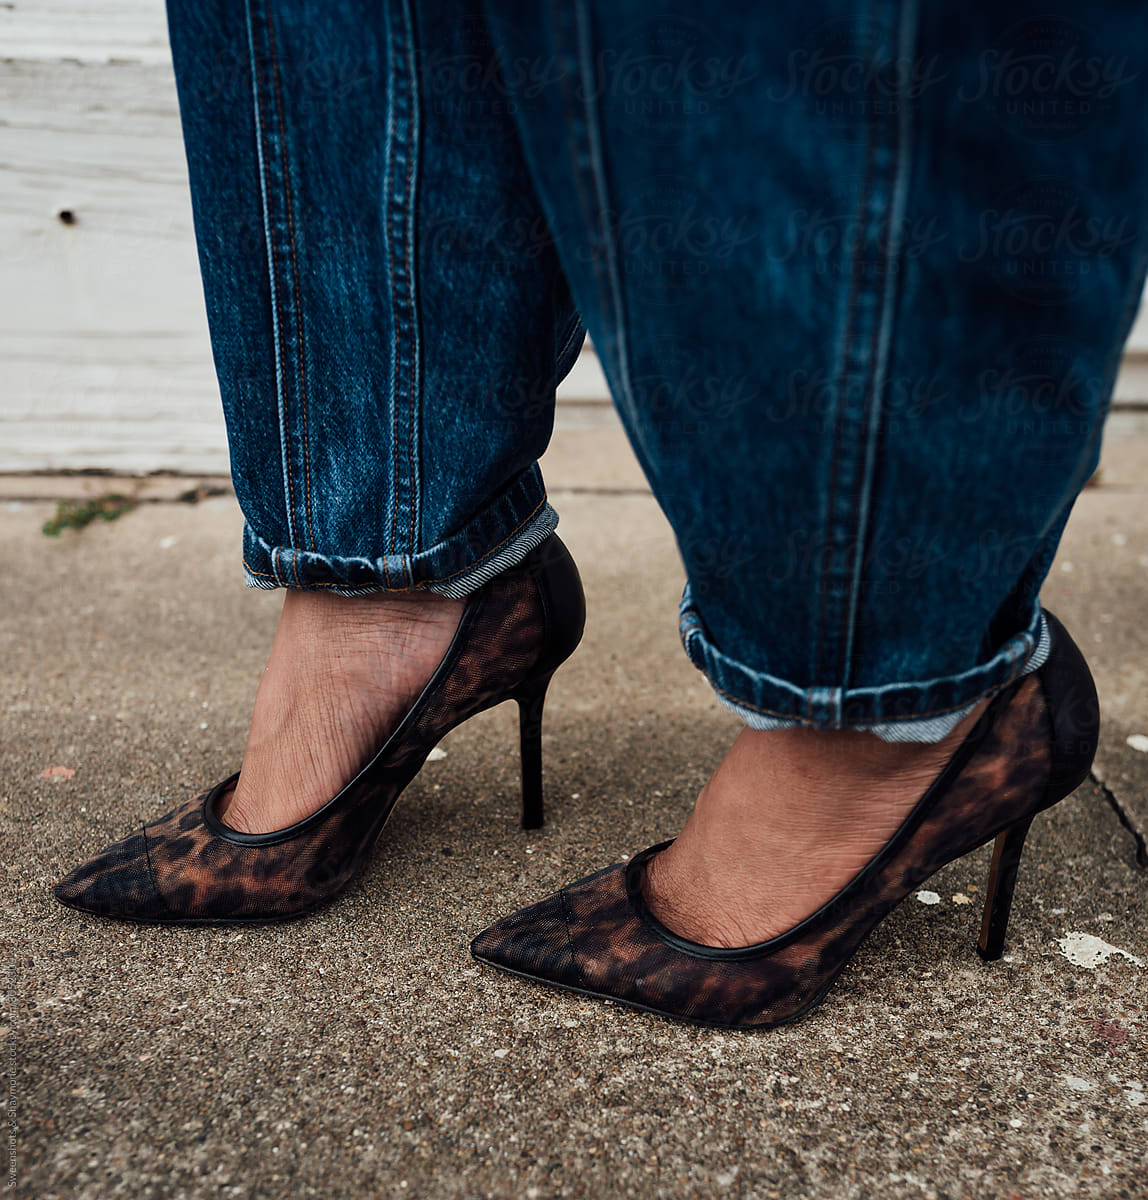 Woman in blue jeans and black see through heel